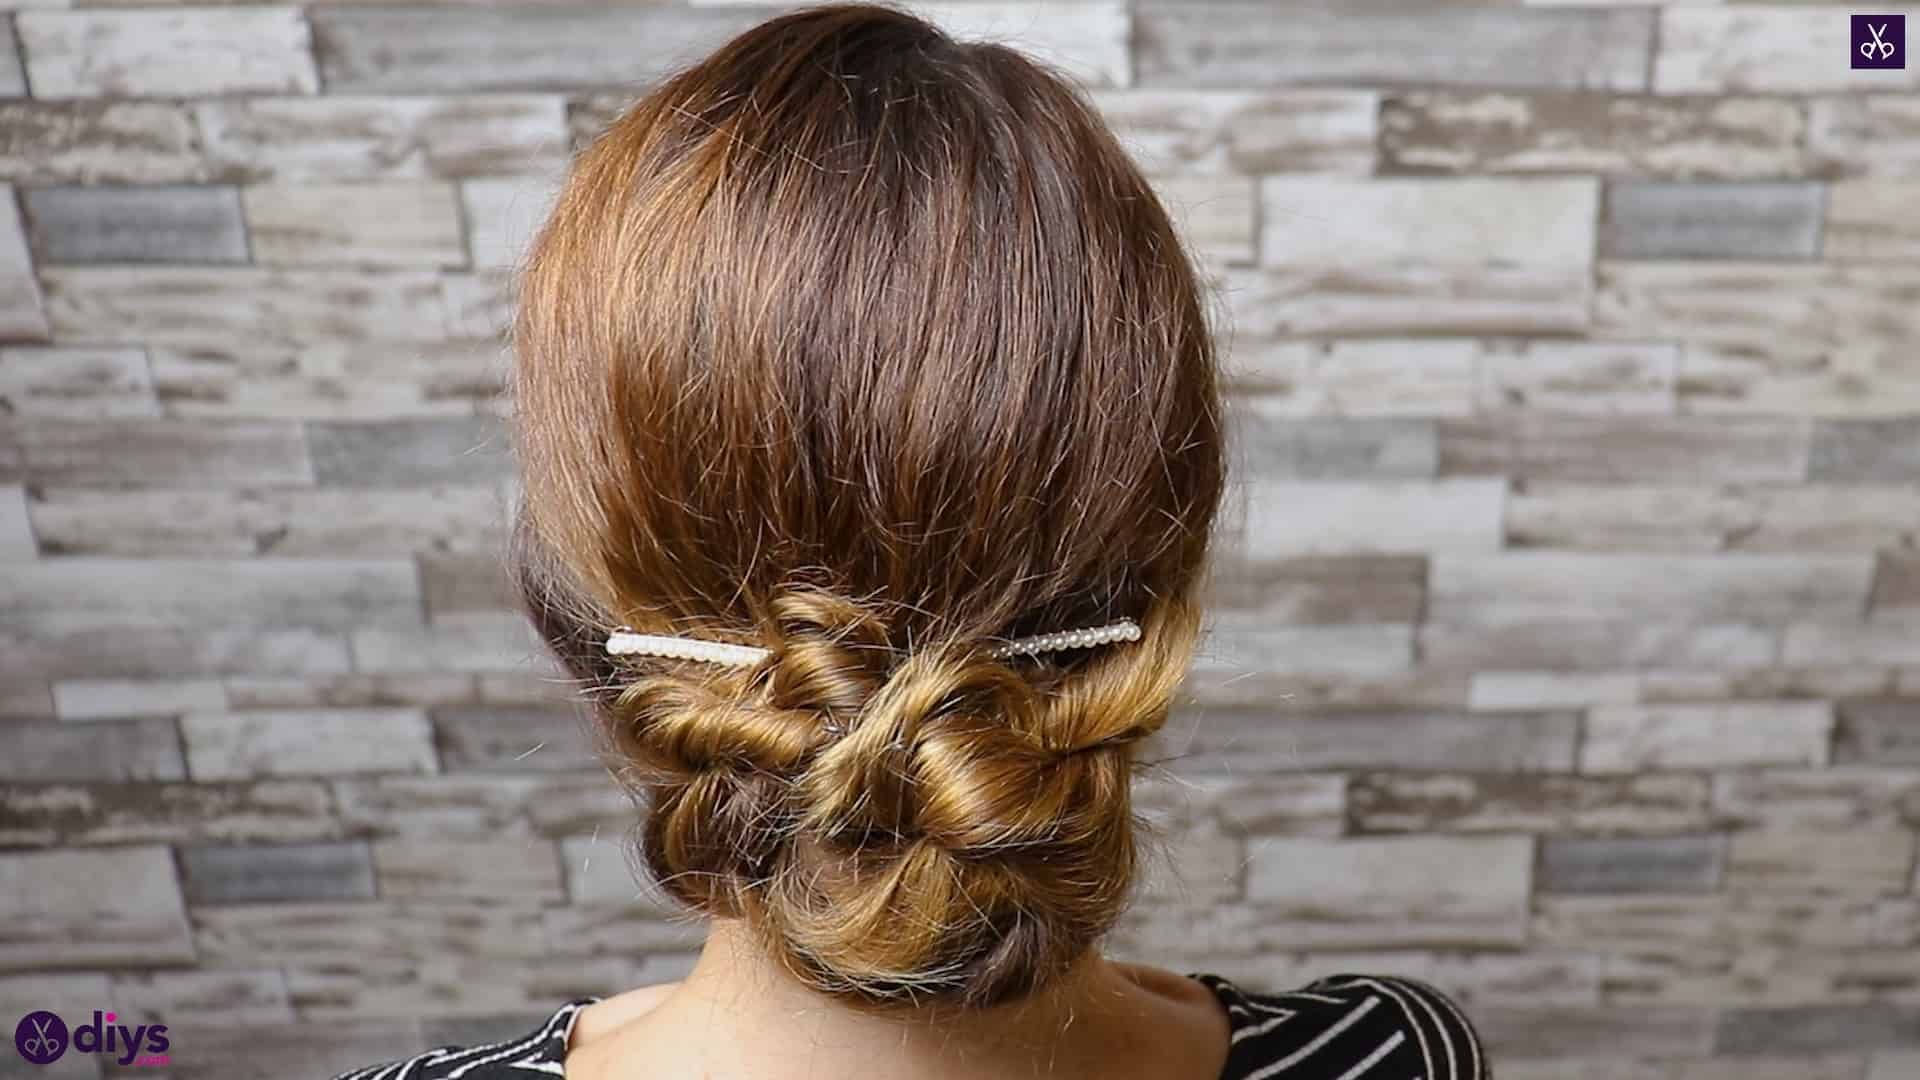 PERFECT DONUT BUN WITH WEAVE | LIALEIGH - YouTube | Braided bun hairstyles,  Donut bun hairstyles, Hair donut